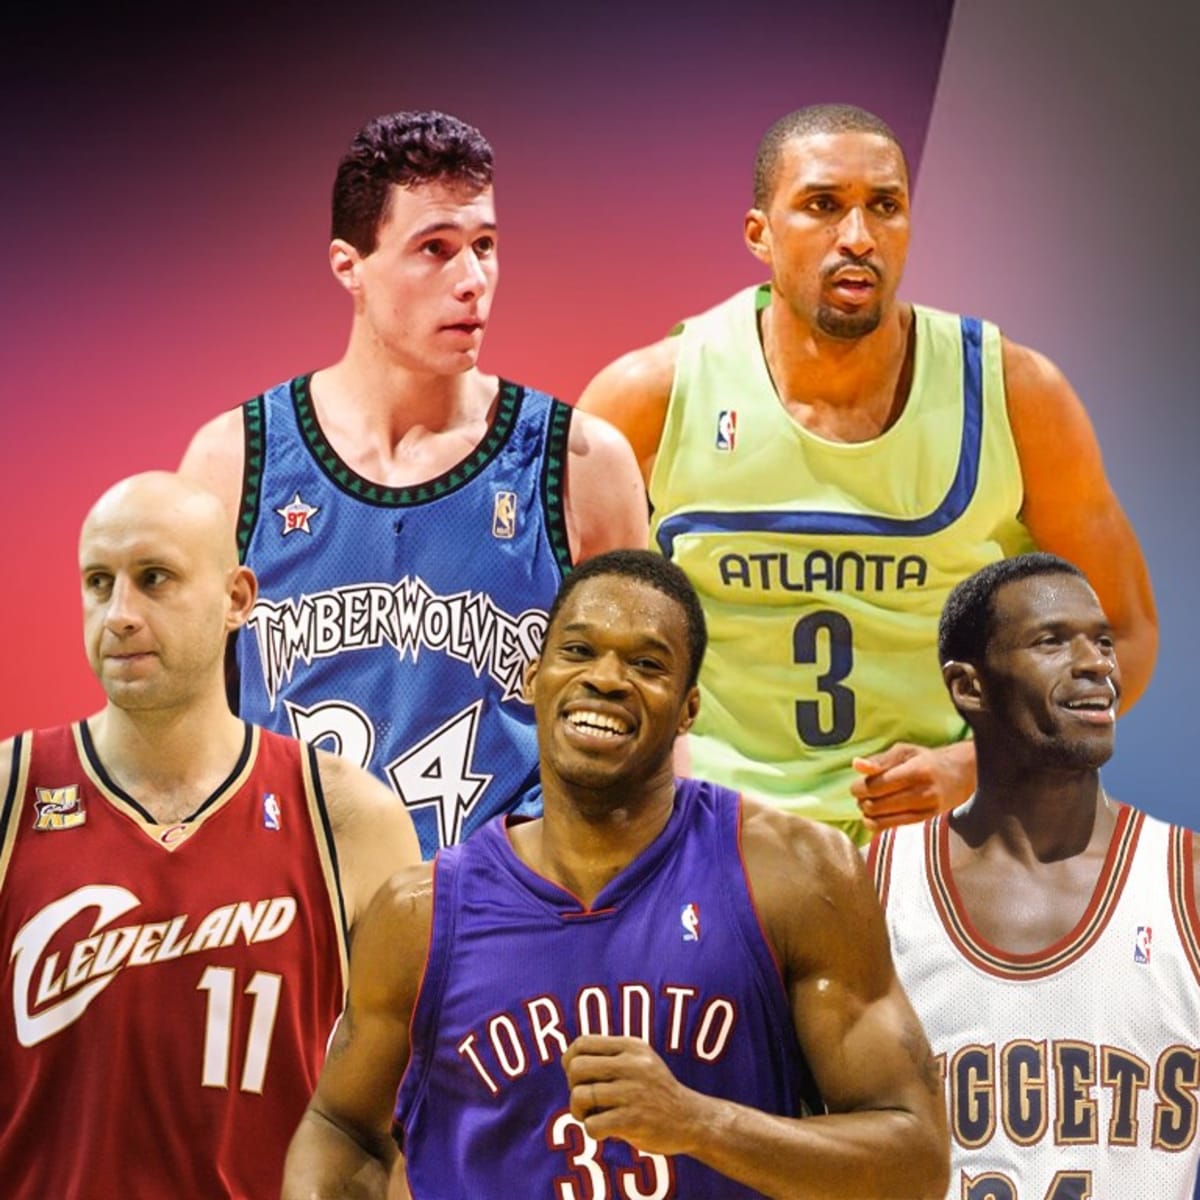 Introducing the Most Random NBA All-Stars of the past 25 years